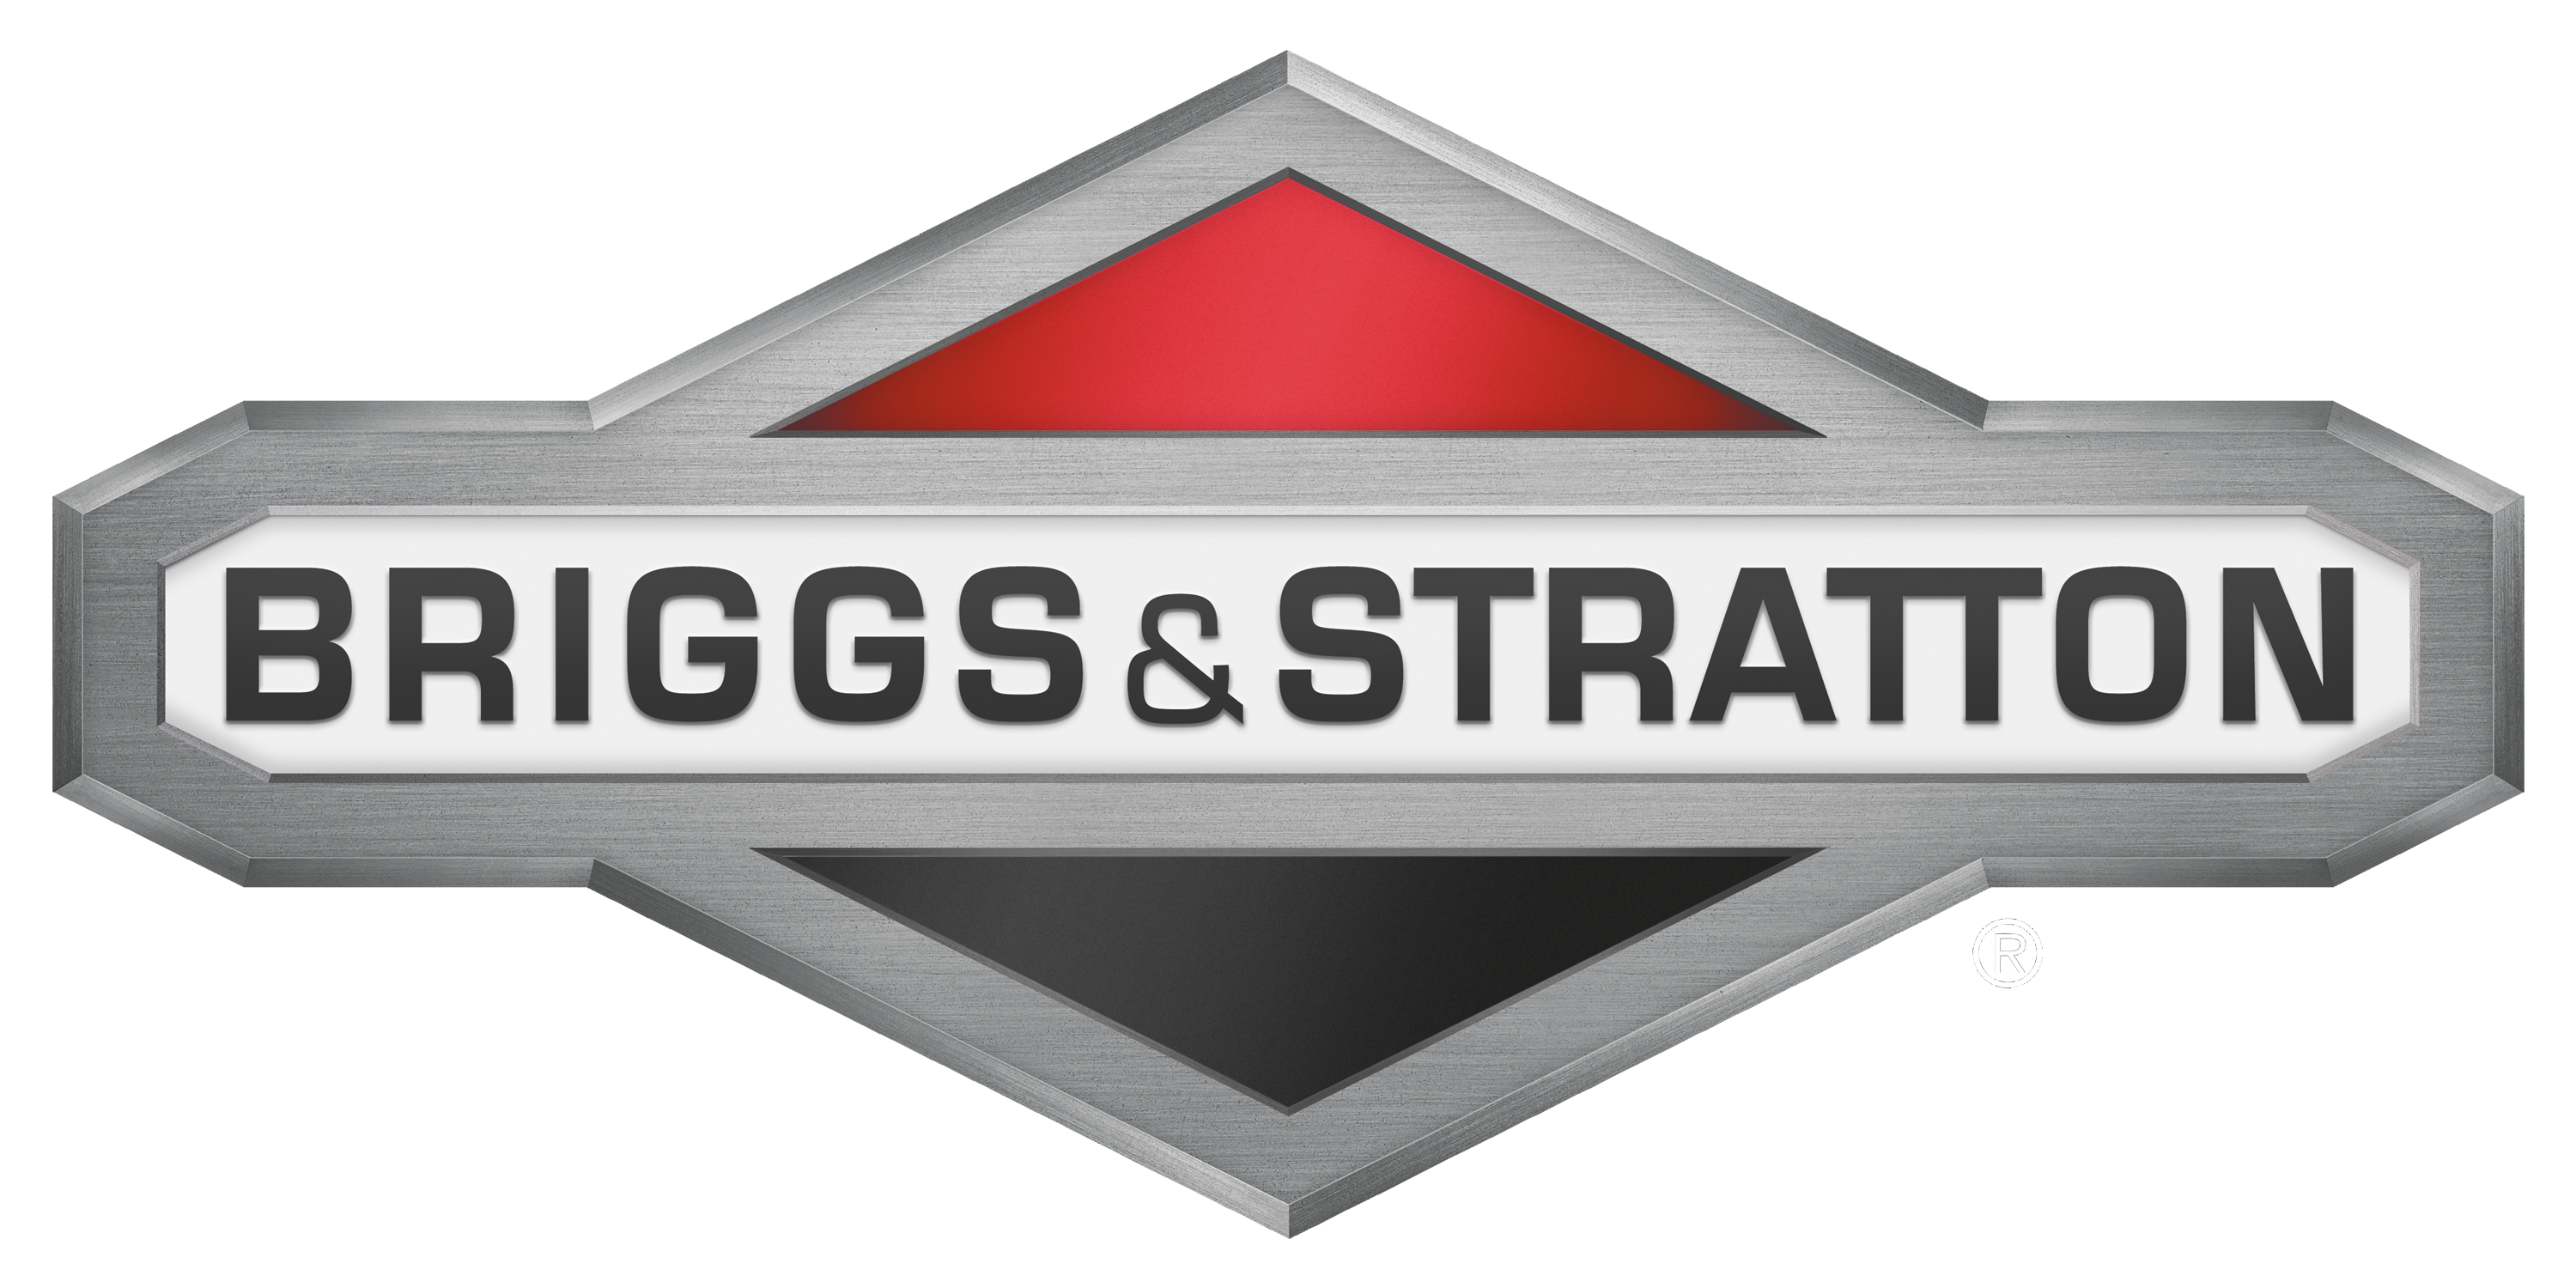 Download - Briggs Stratton Logo PNG, Briggs Stratton Logo Vector PNG - Free PNG